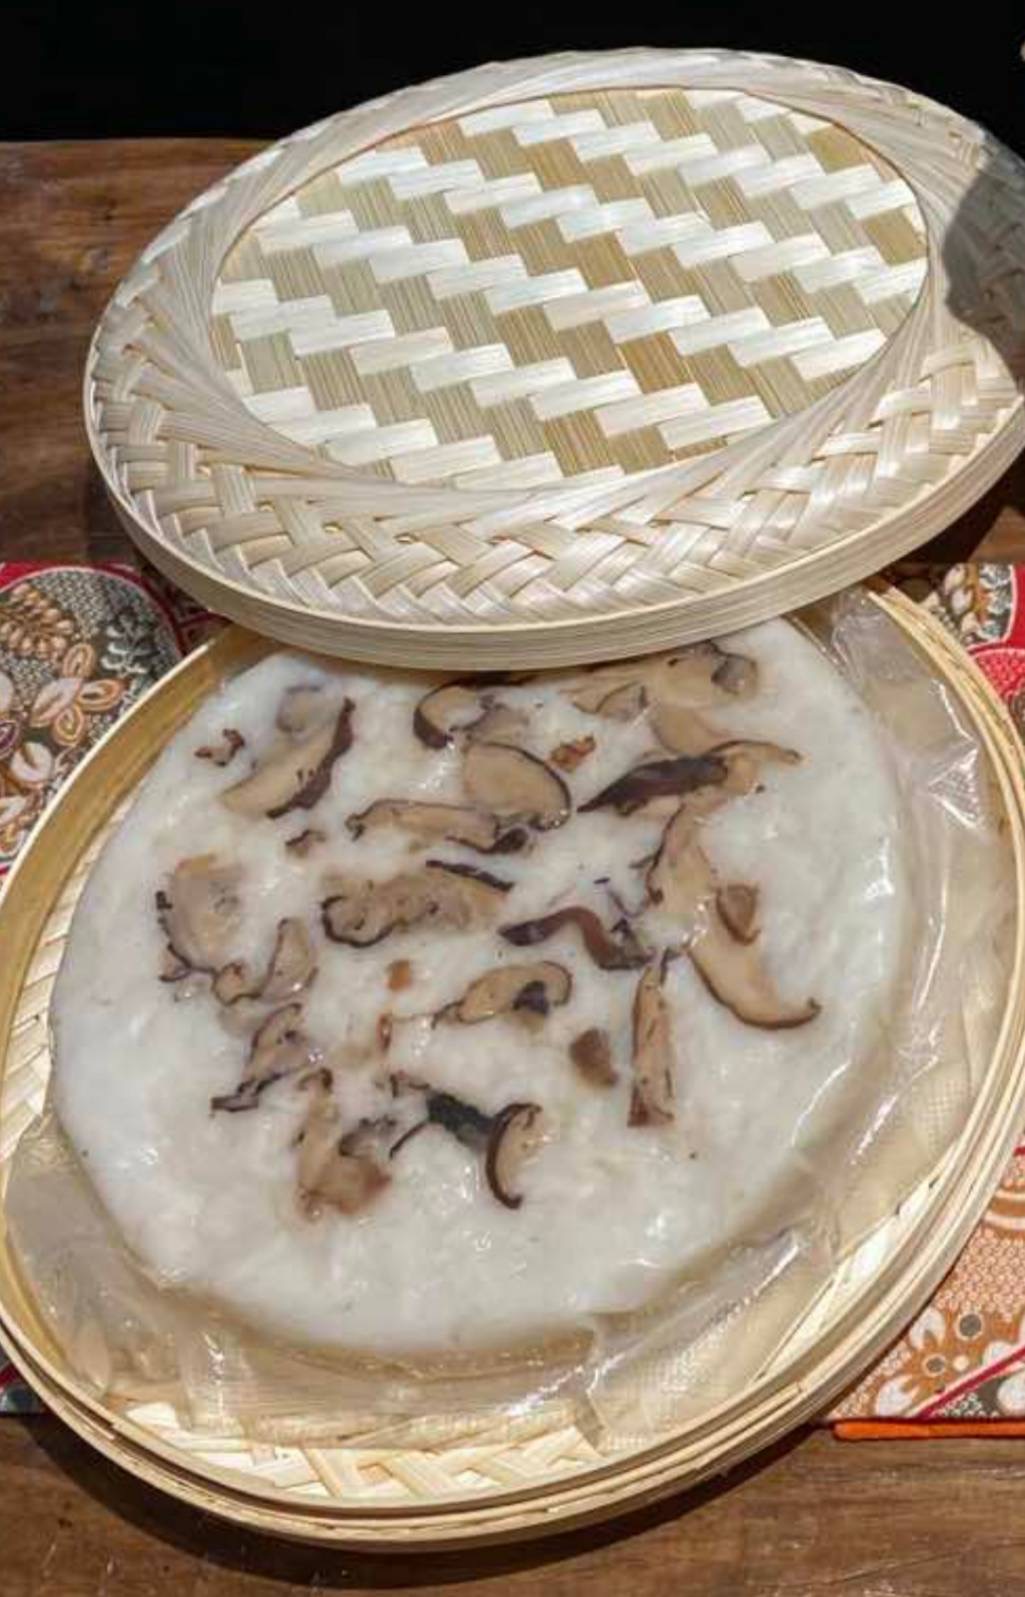 At the Harmony Hall, vegetarian food like this mushroom delicacy are available in stalls.